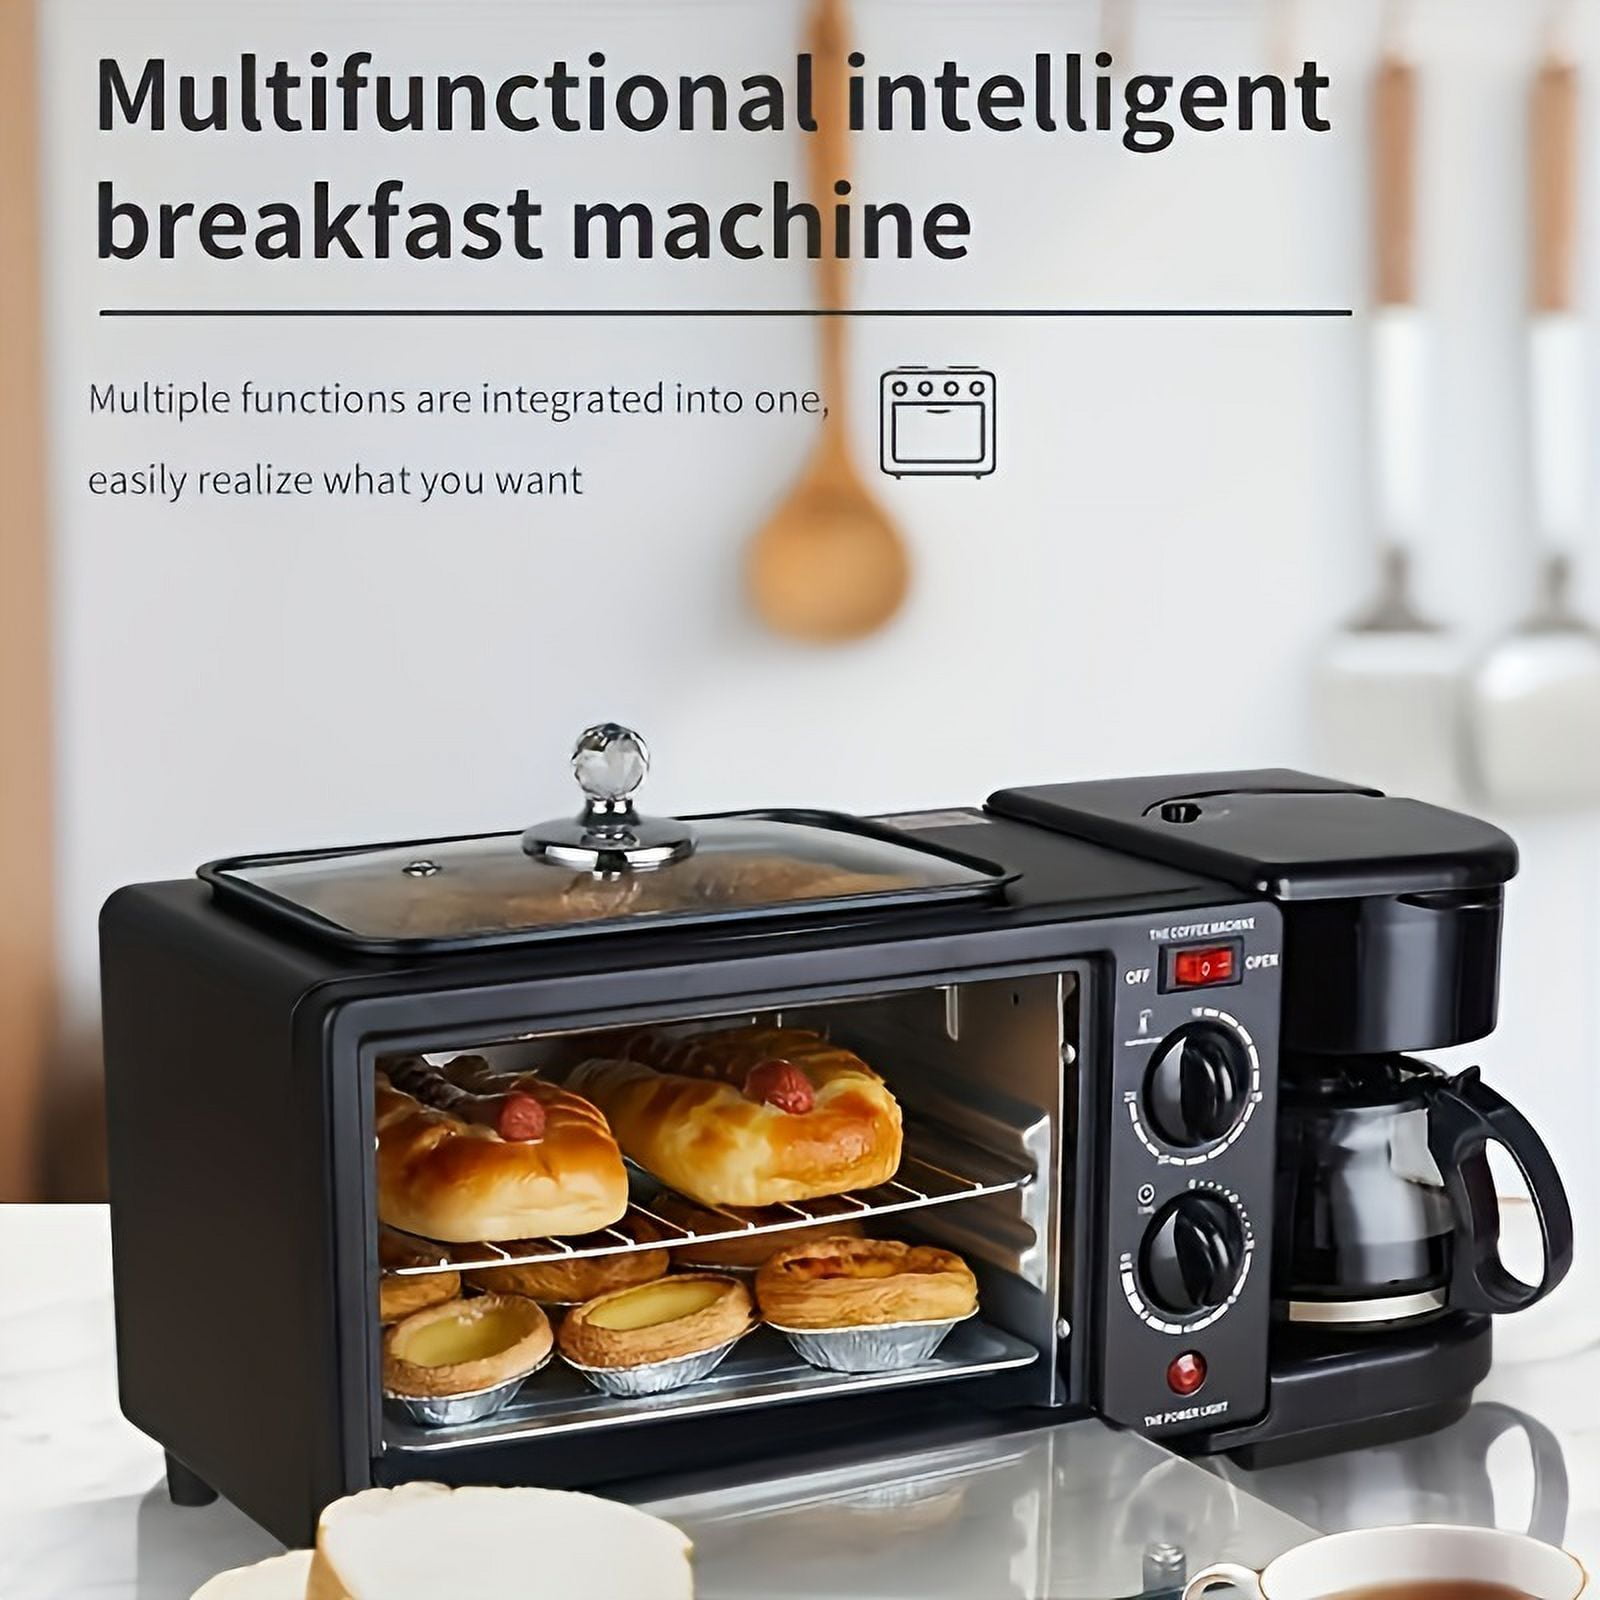 Toscana U 3 in 1 breakfast maker pros and cons